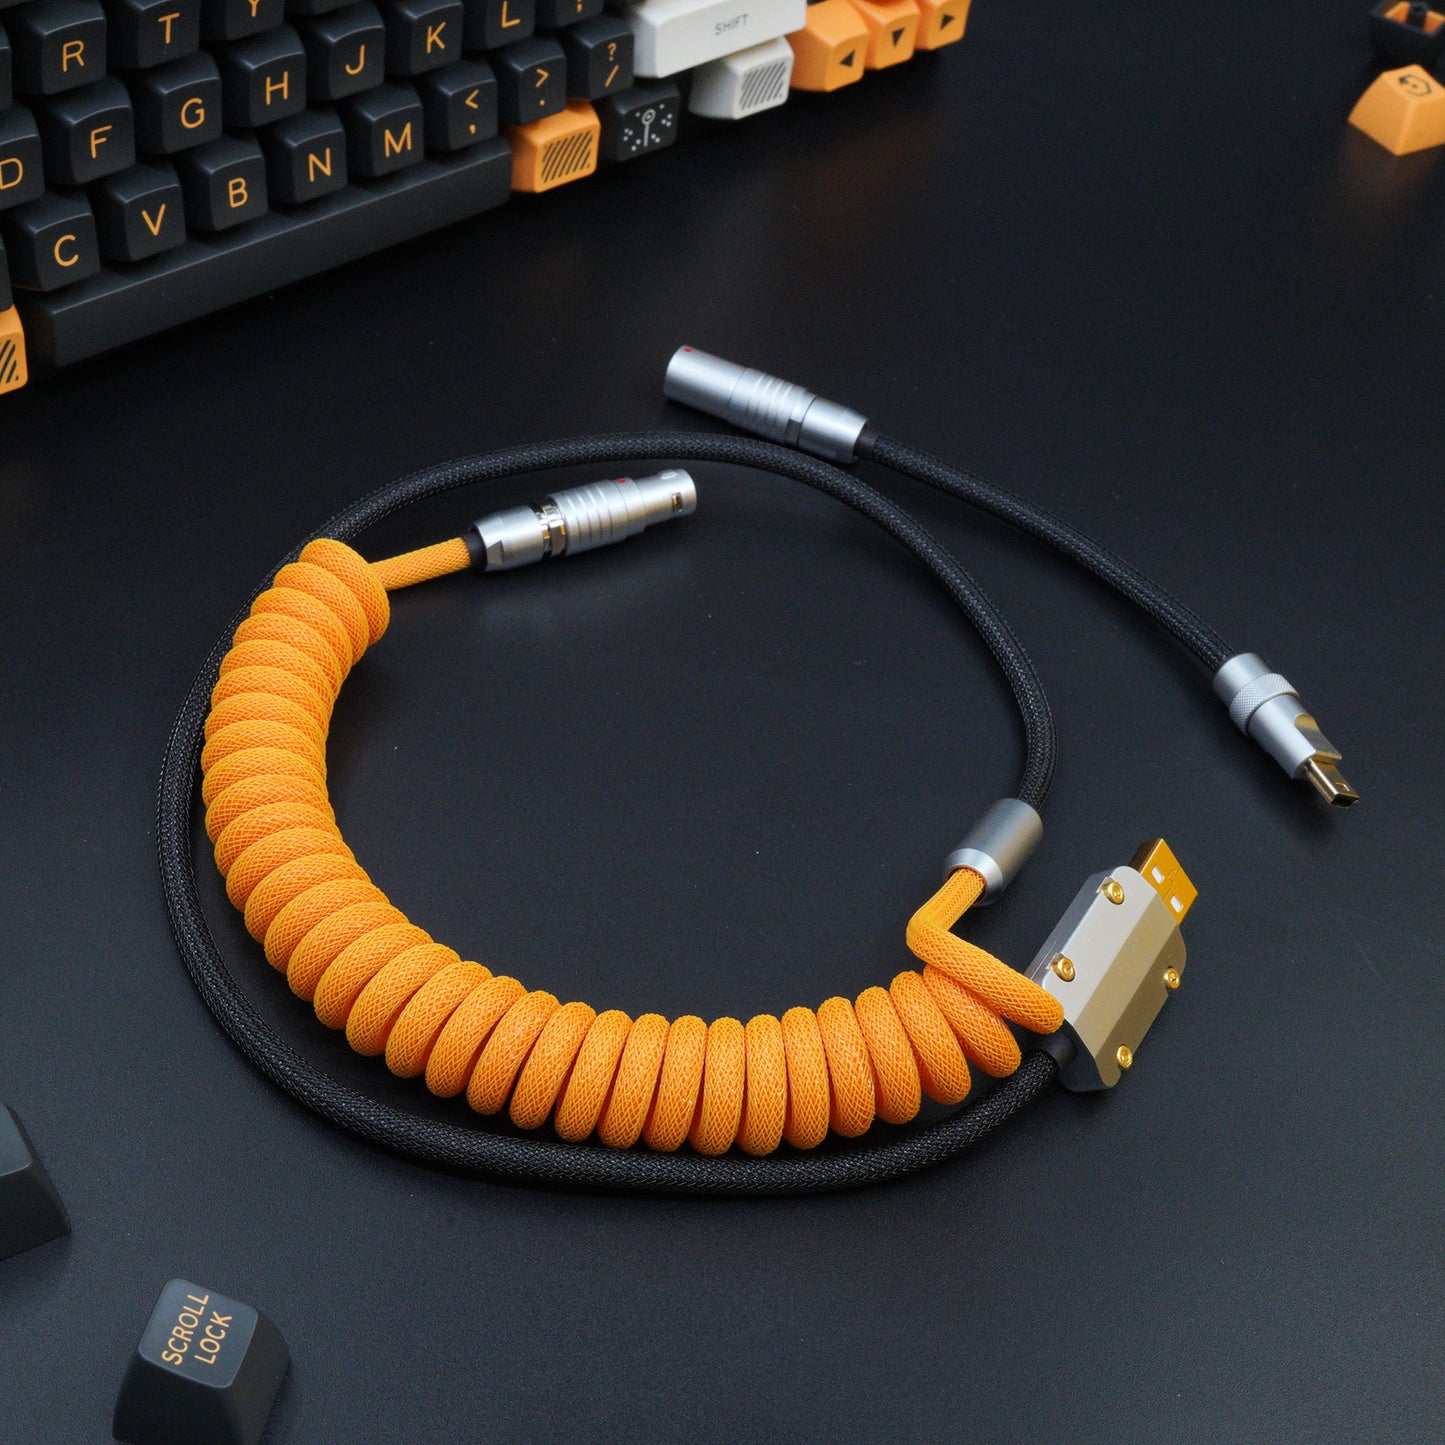 Sleeved Coiled Keyboard Aviator Cable, Lemo Style Connector - Tangerine/Black